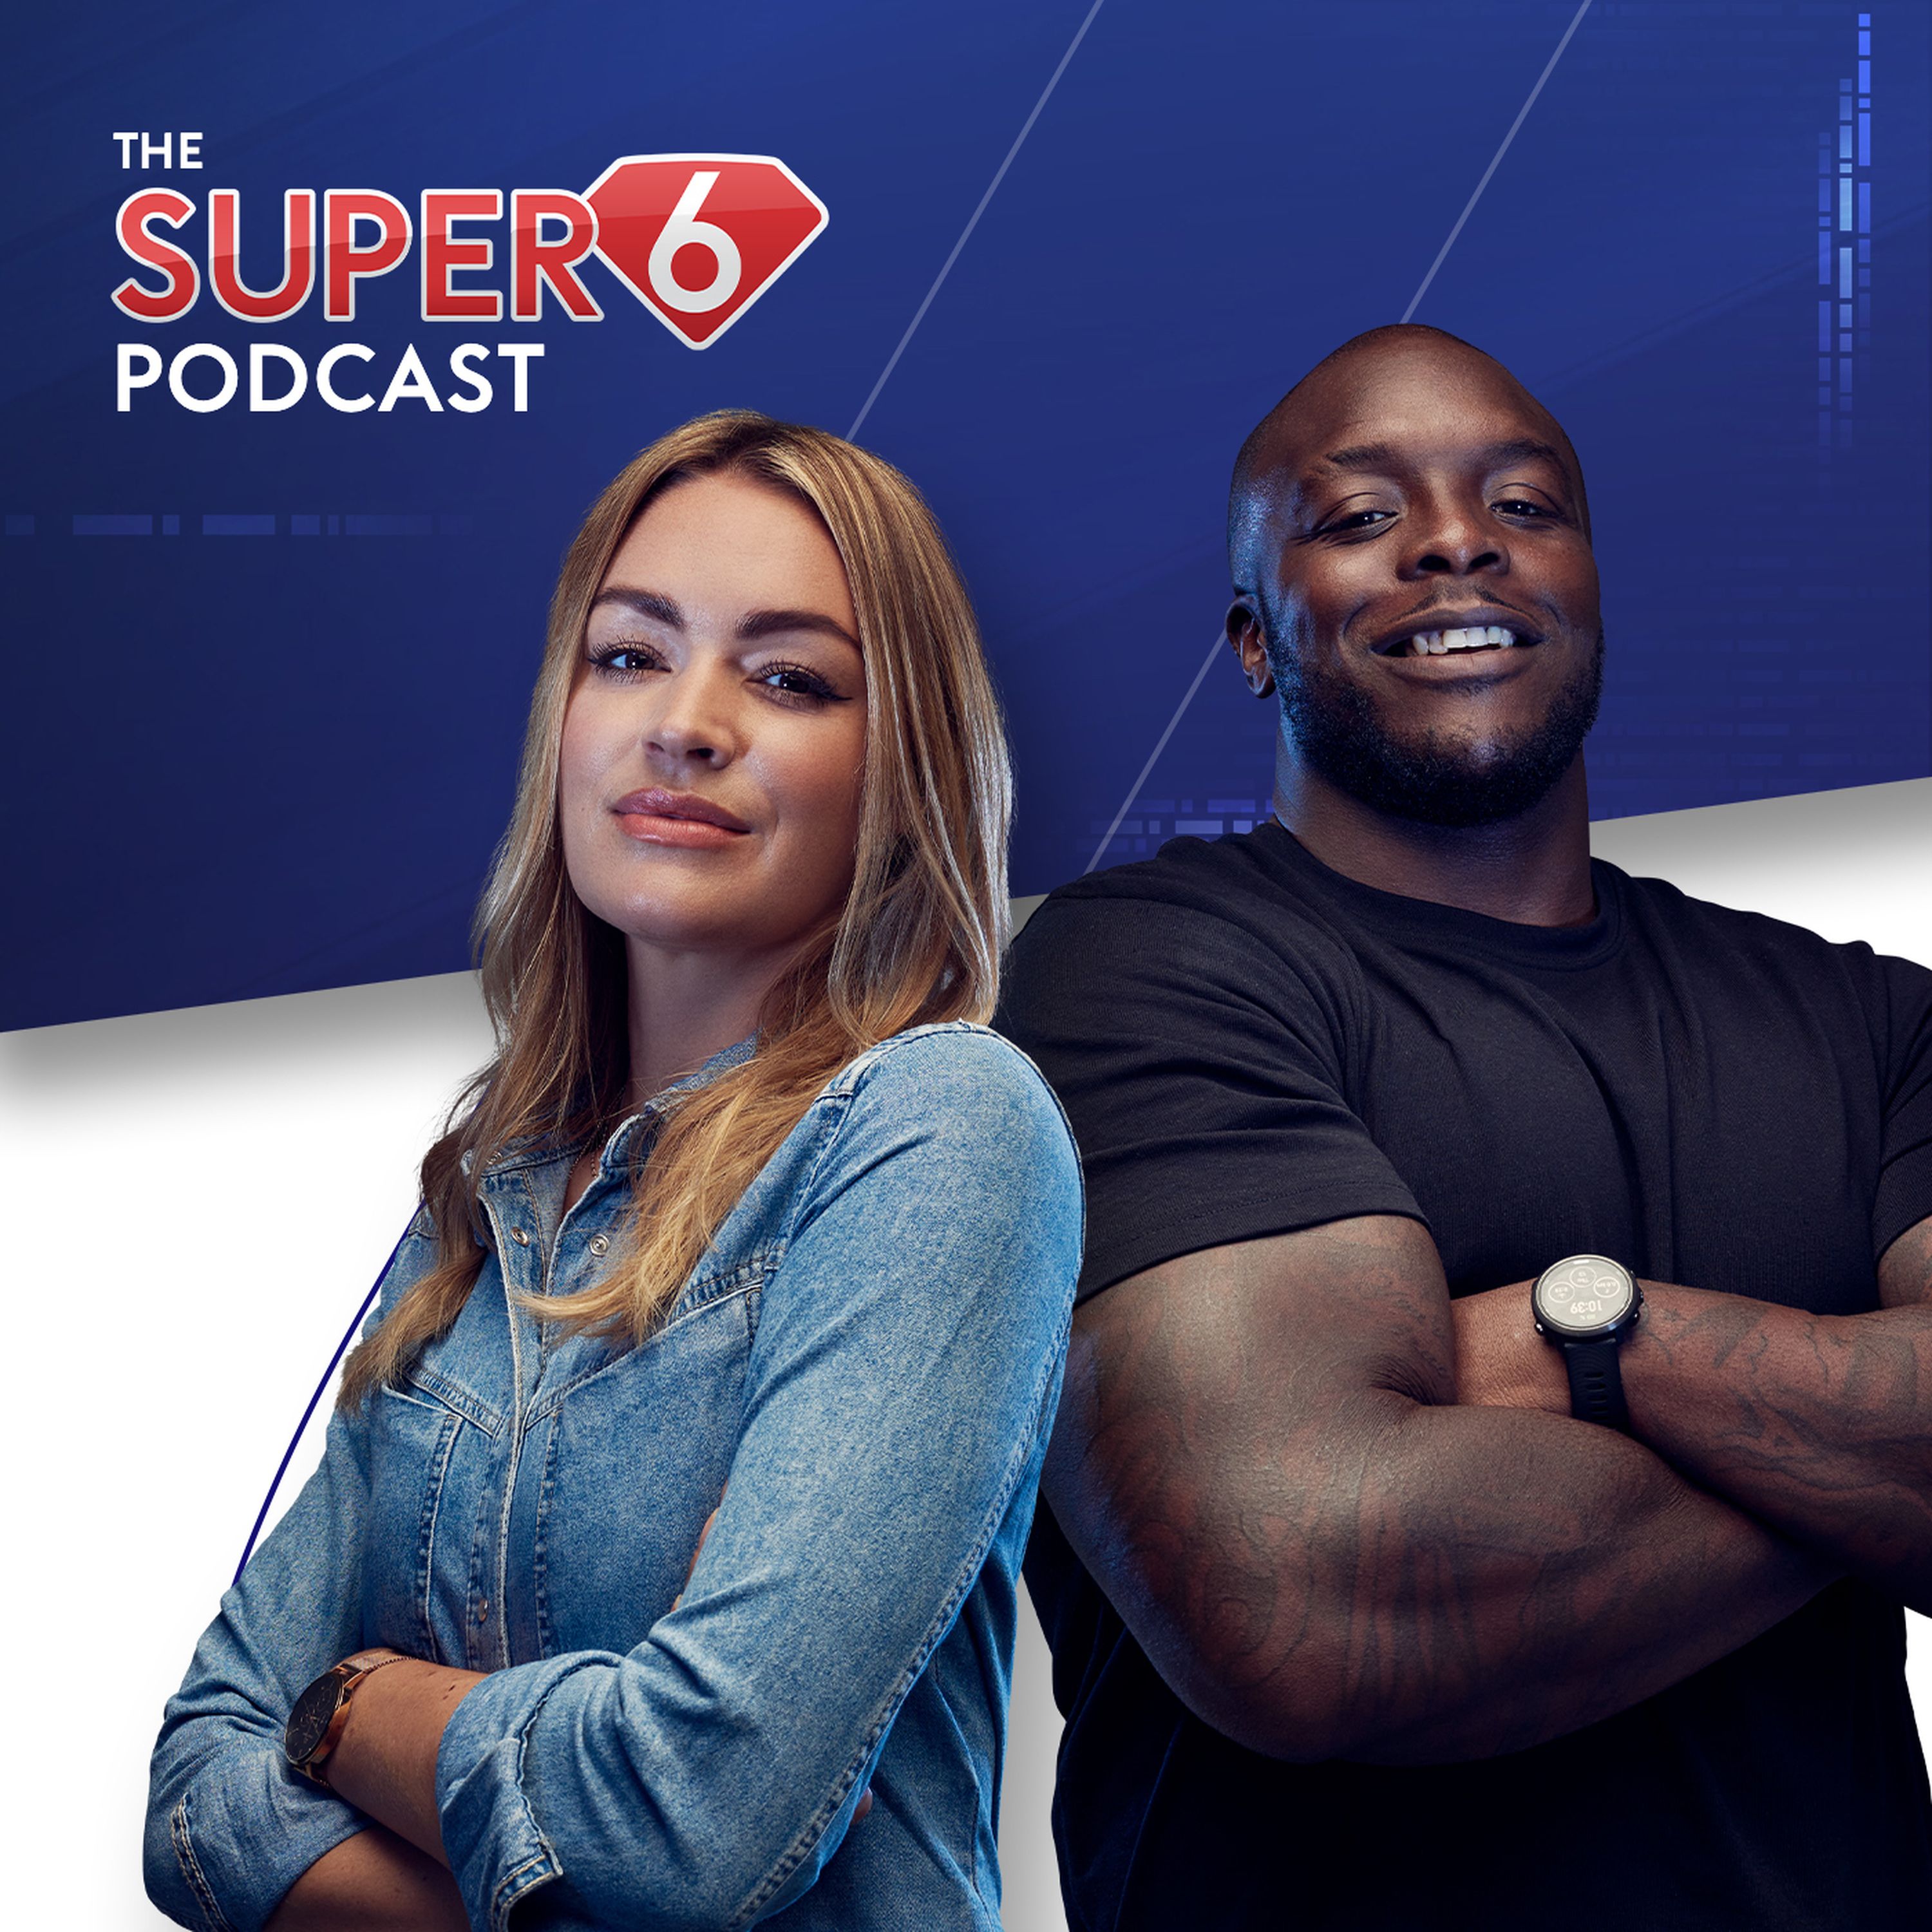 Clinton Morrison has seen it all - including Keane vs McCarthy! | The Super 6 Podcast episode 7